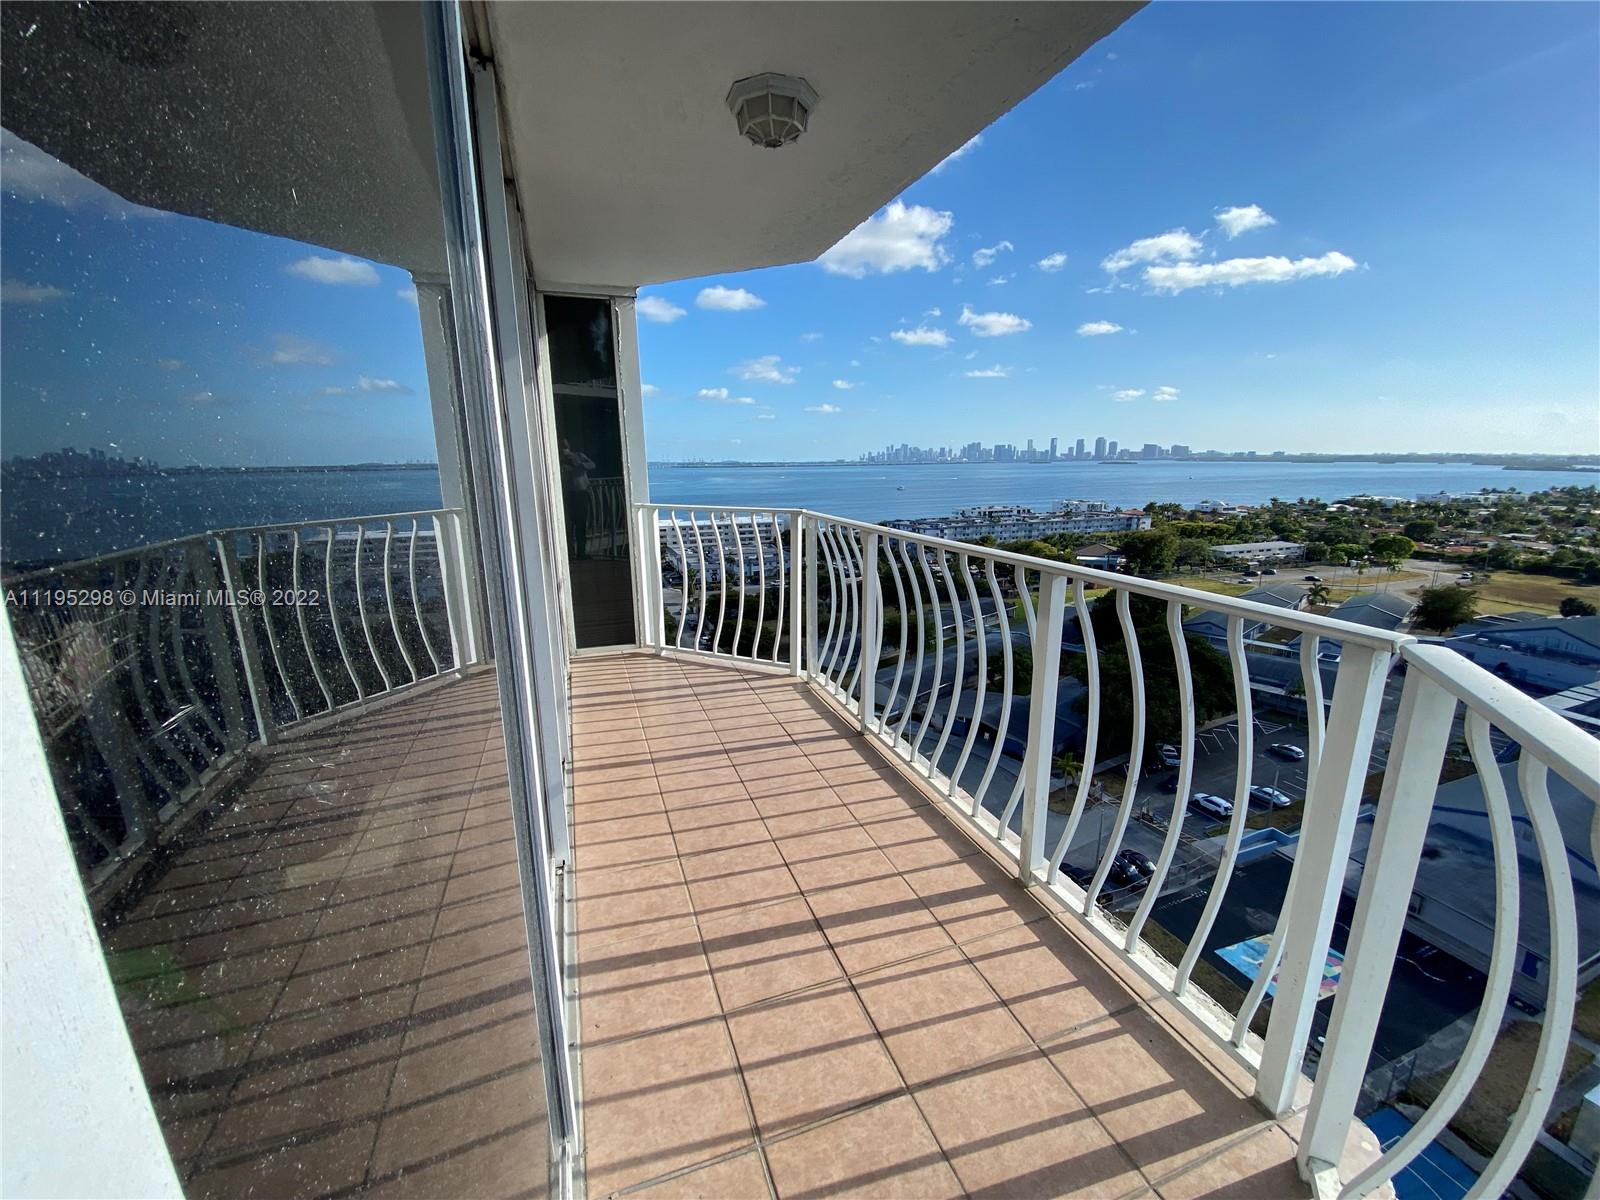 Unobstructed views of Downtown Brickell and South Beach from this 3 bedroom/3 bathroom Condo with 3 